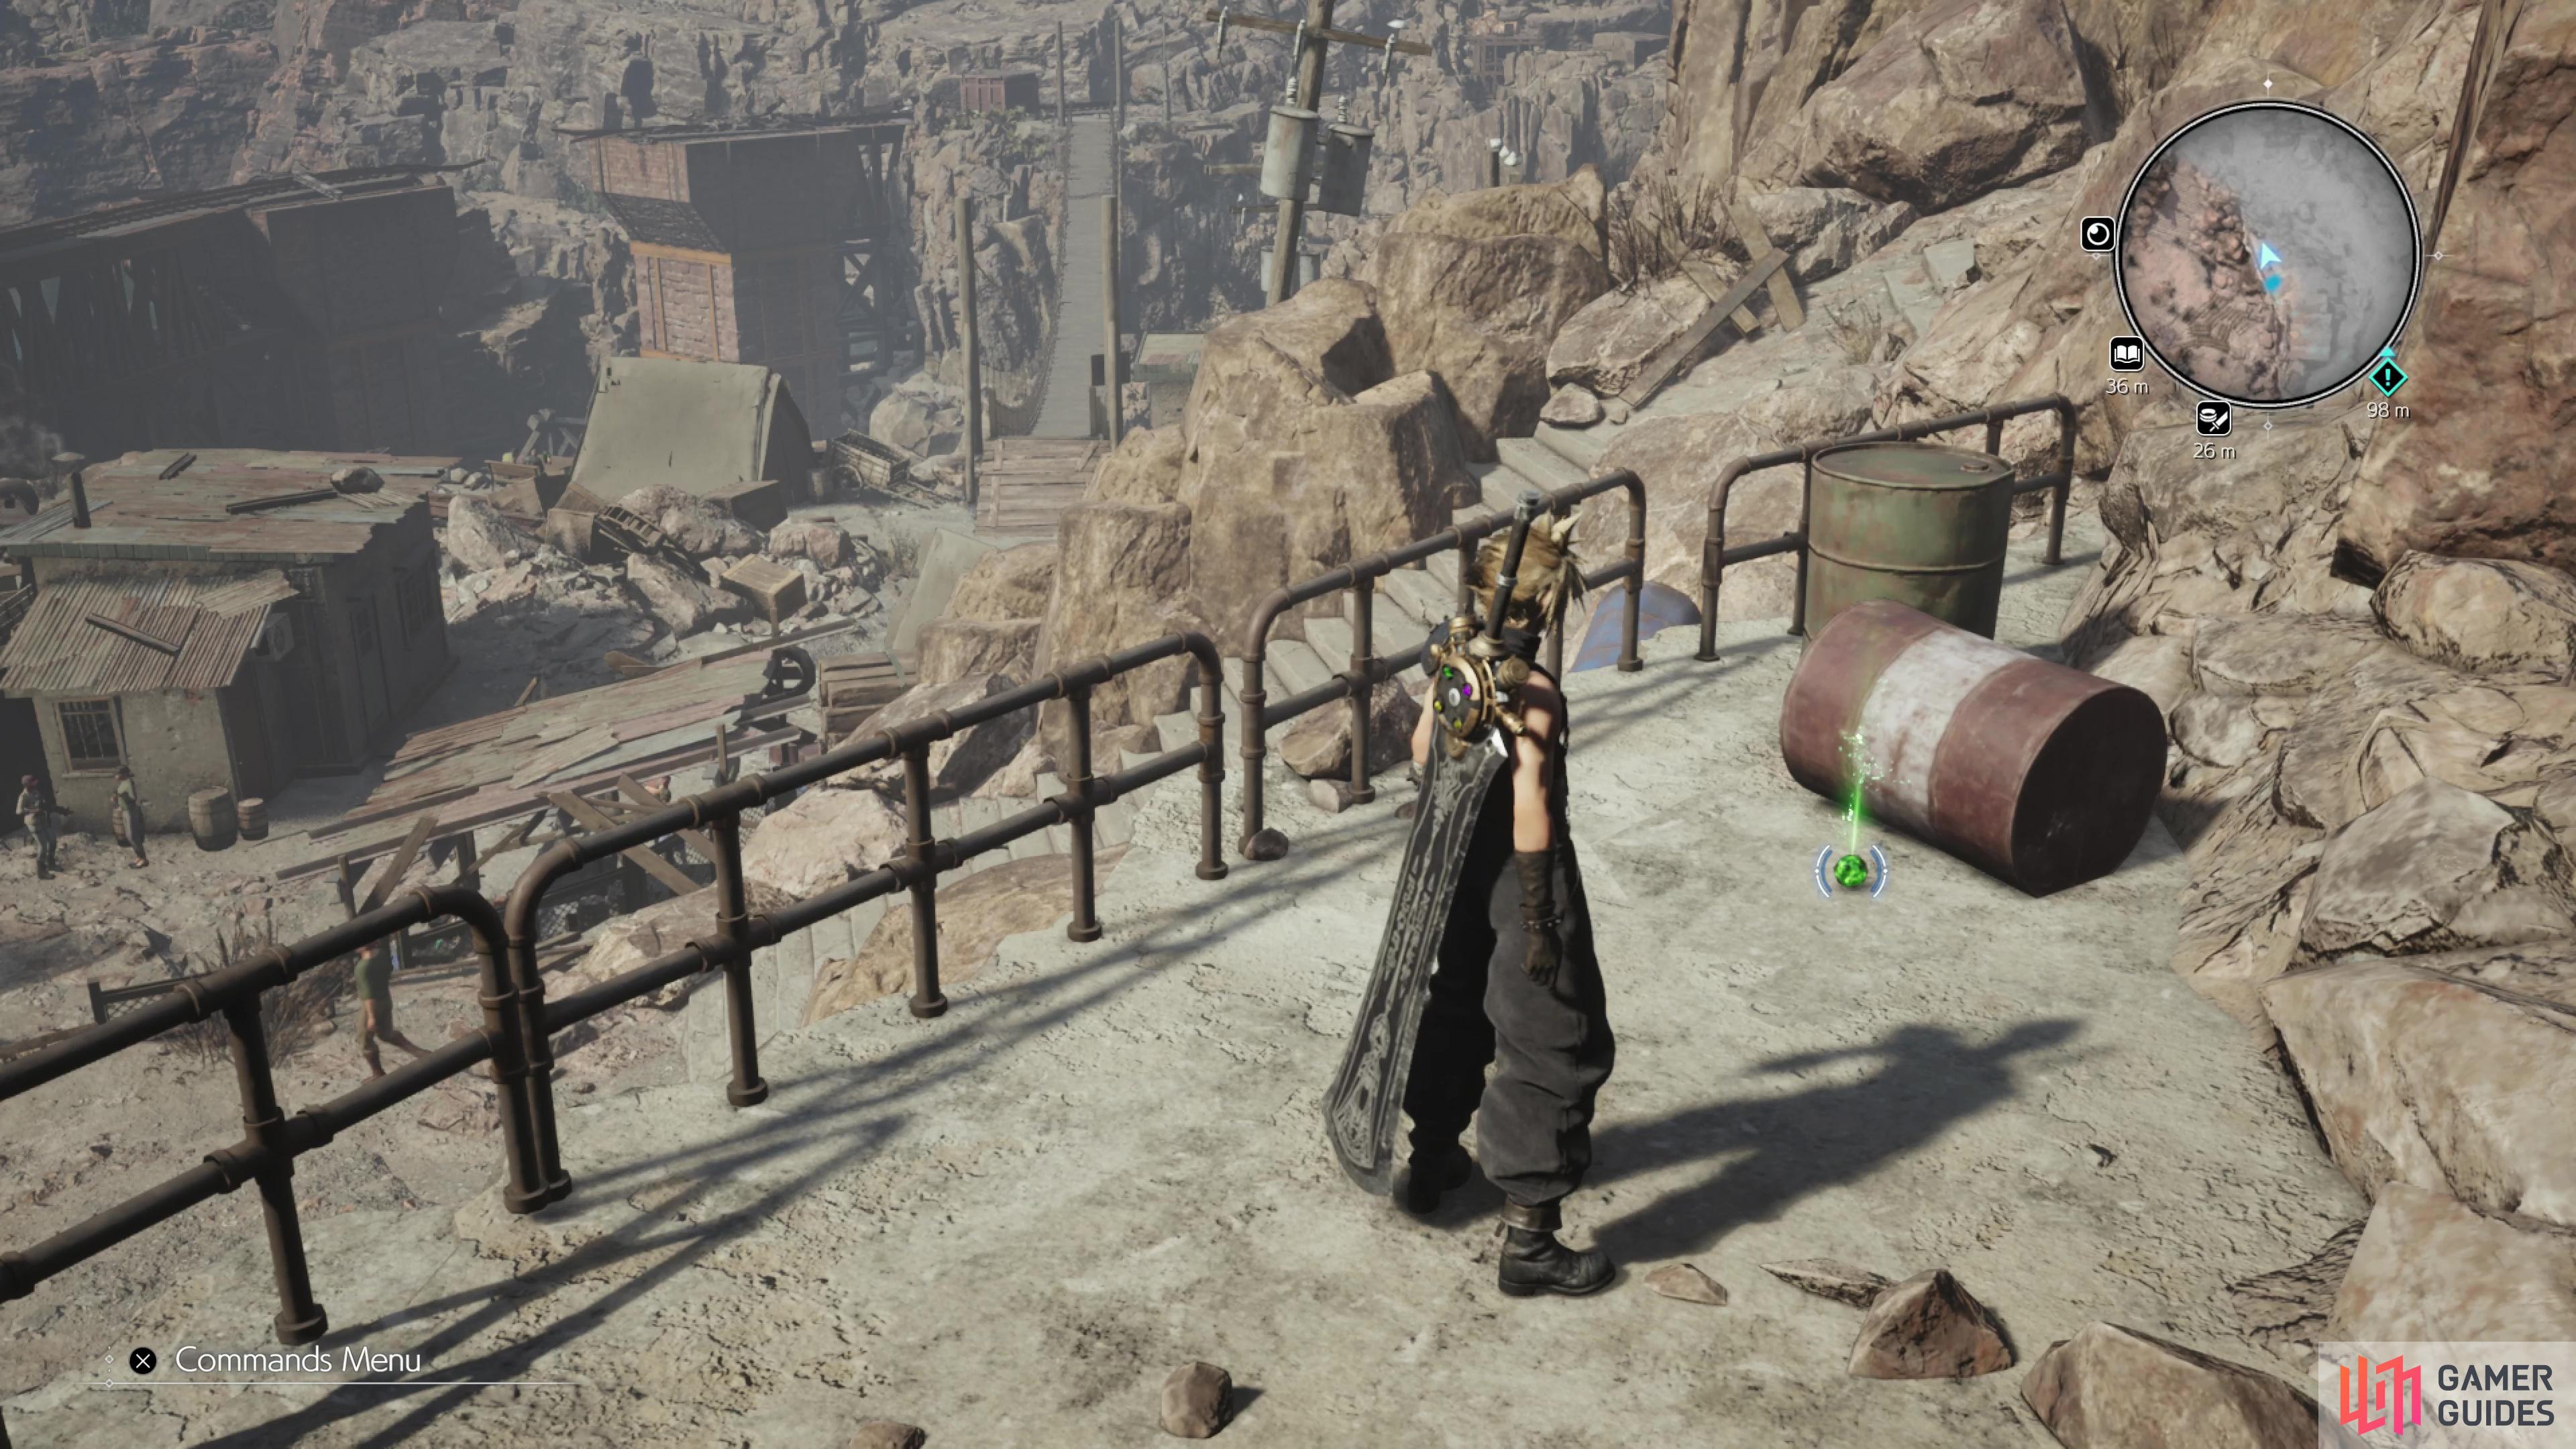 Look behind the barrels to find the Revival Materia.